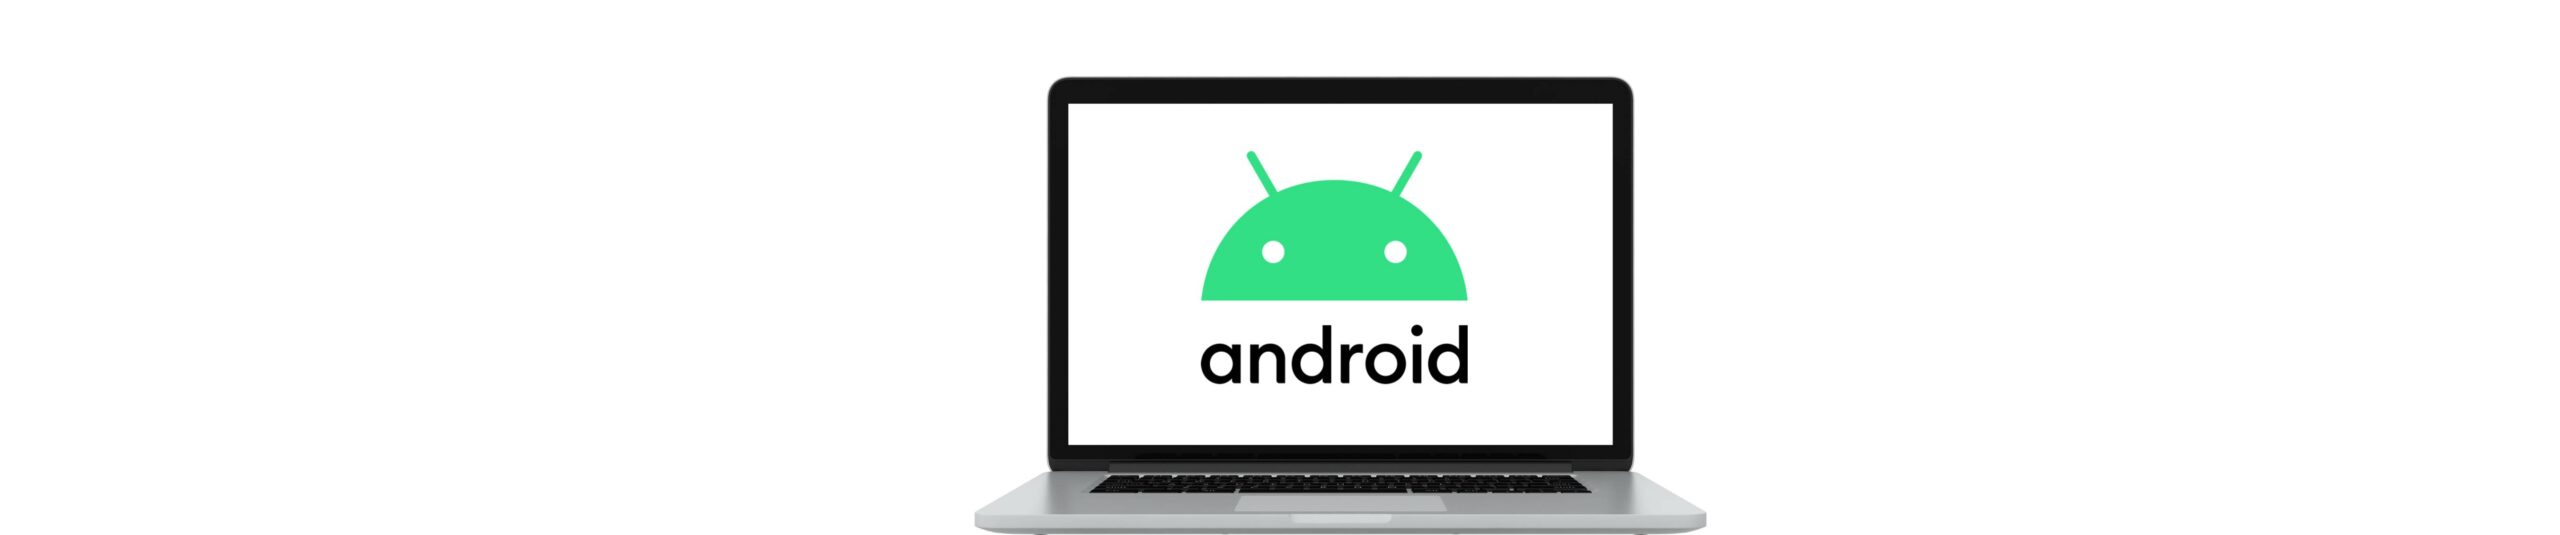 android emulator feature